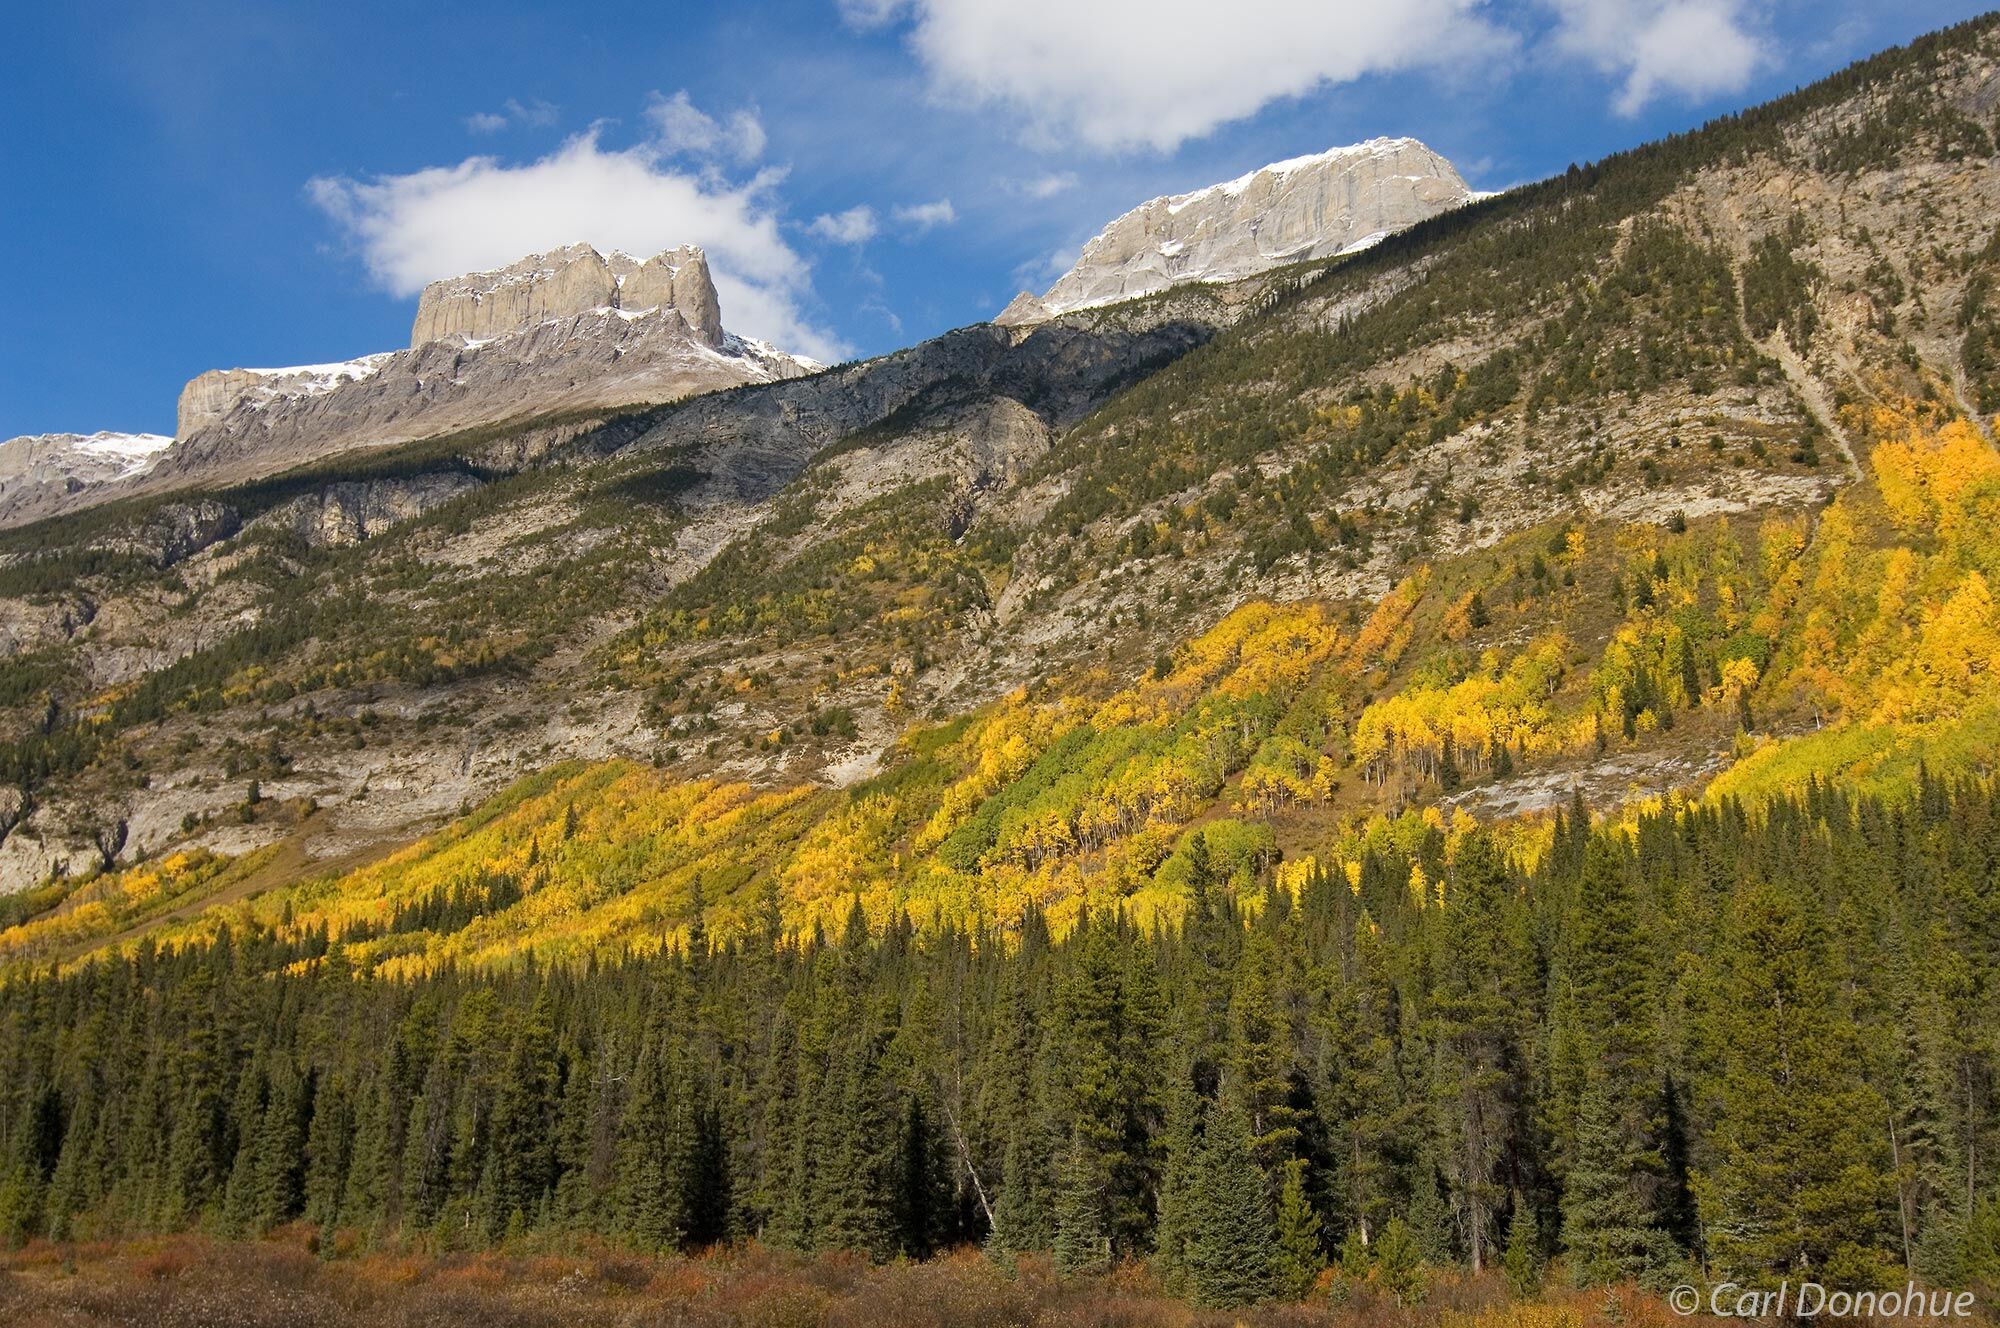 Fall colors brighten the mountainsides of the Canadian Rockies in Banff  National Park, Alberta, Canada.